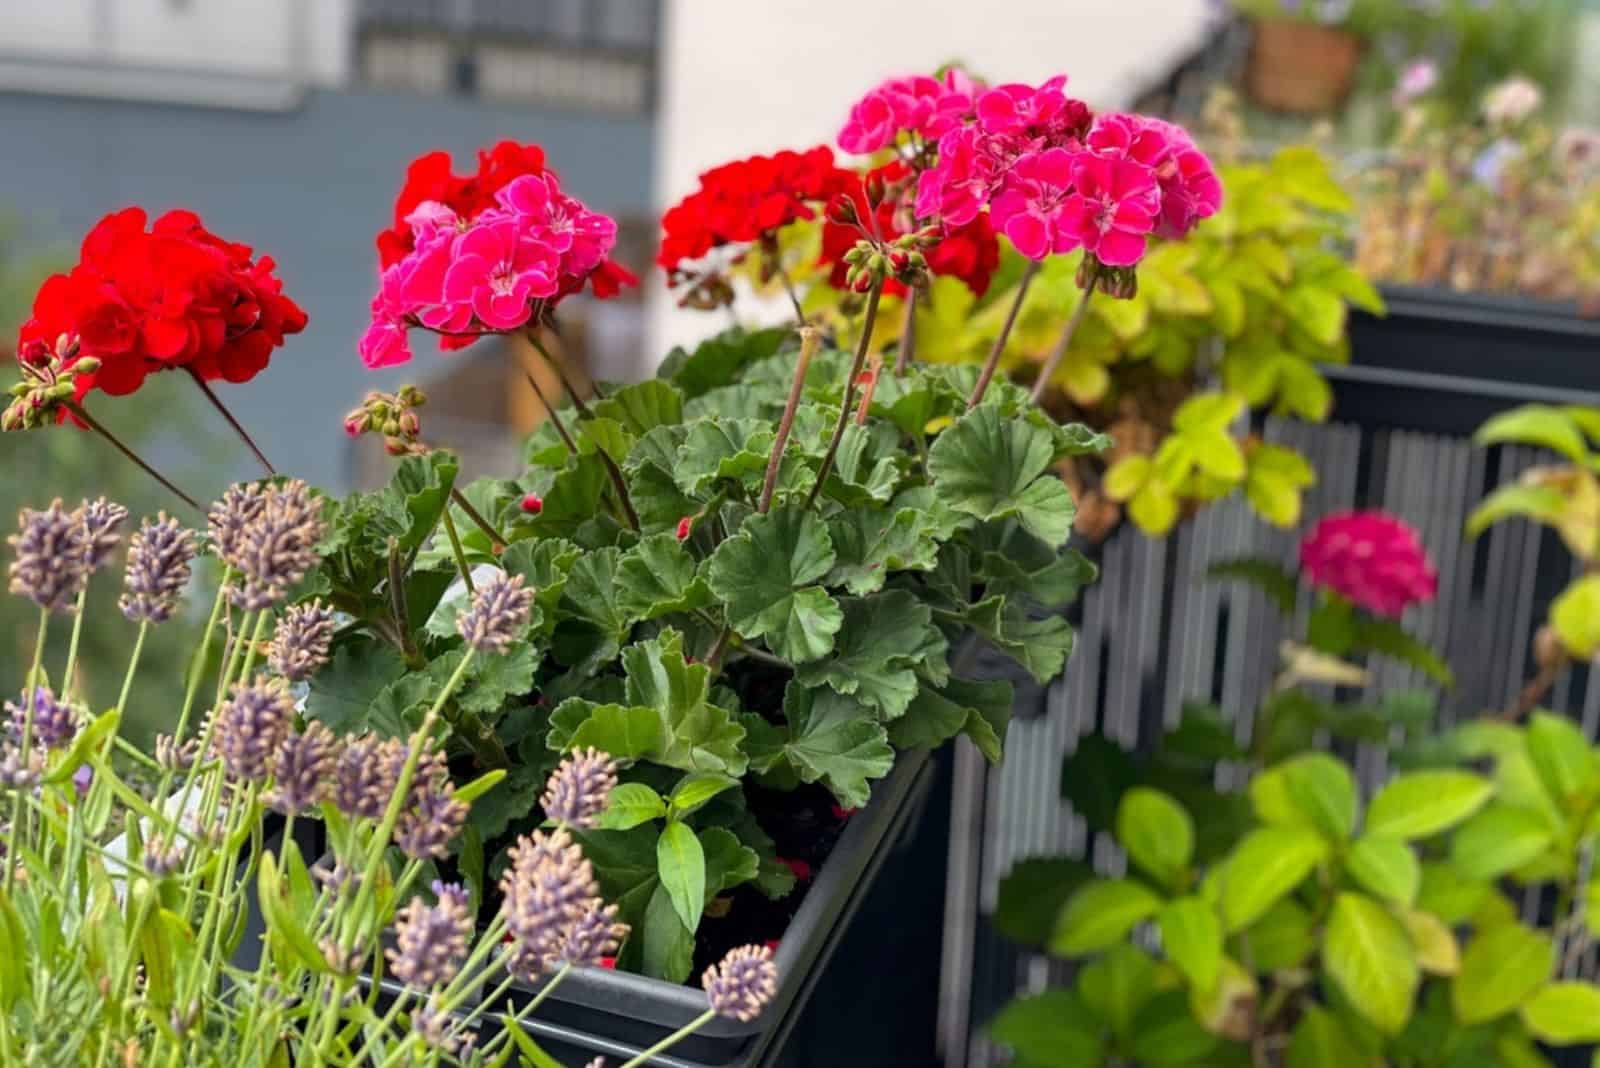 Geraniums in pots on the balcony